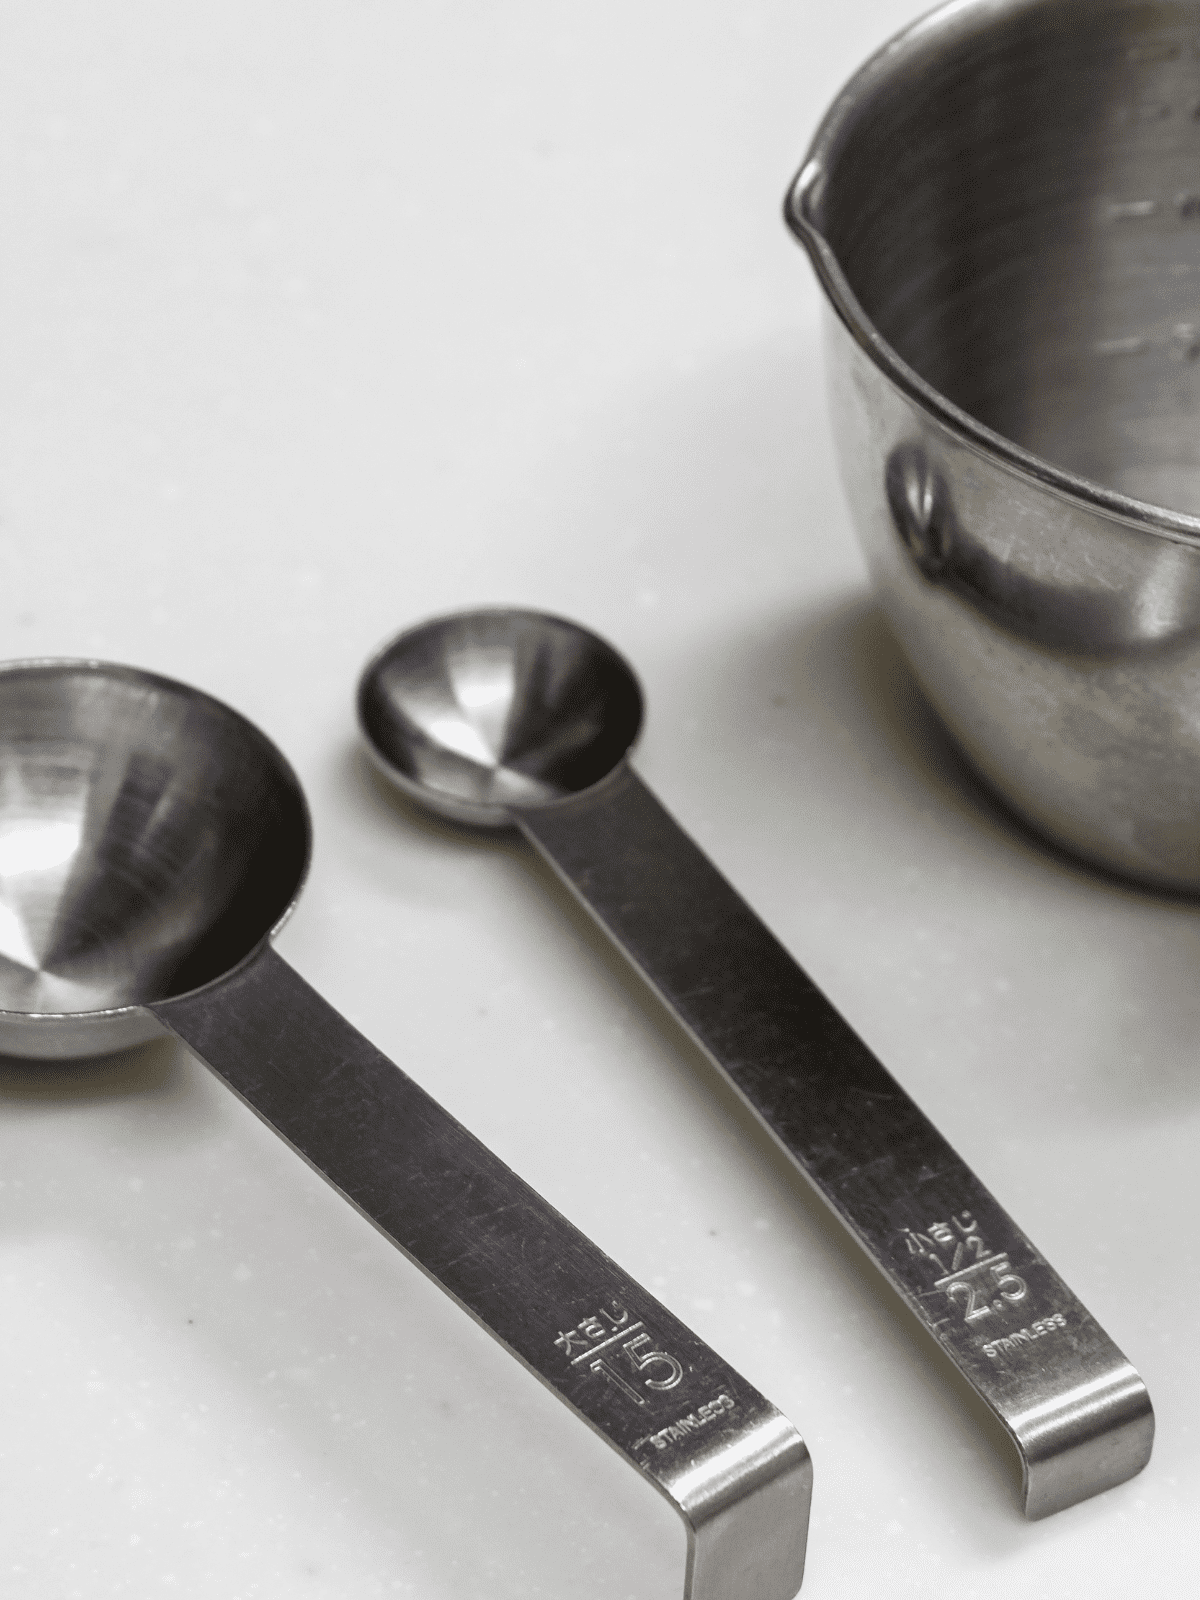 Metal measuring spoons and cup.